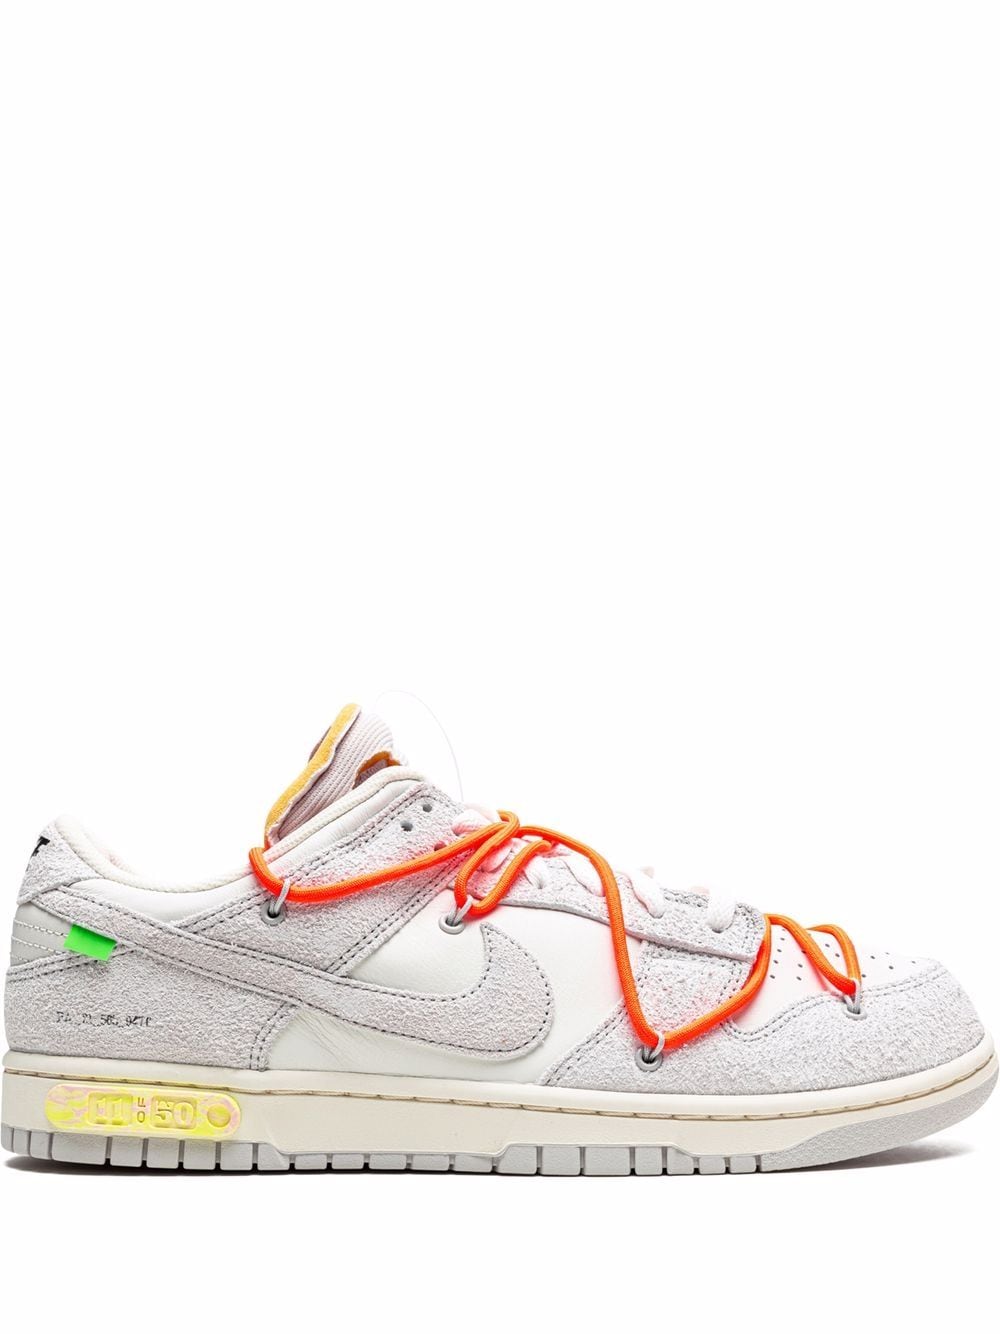 Image 1 of Nike X Off-White Dunk Low "Lot 11" sneakers